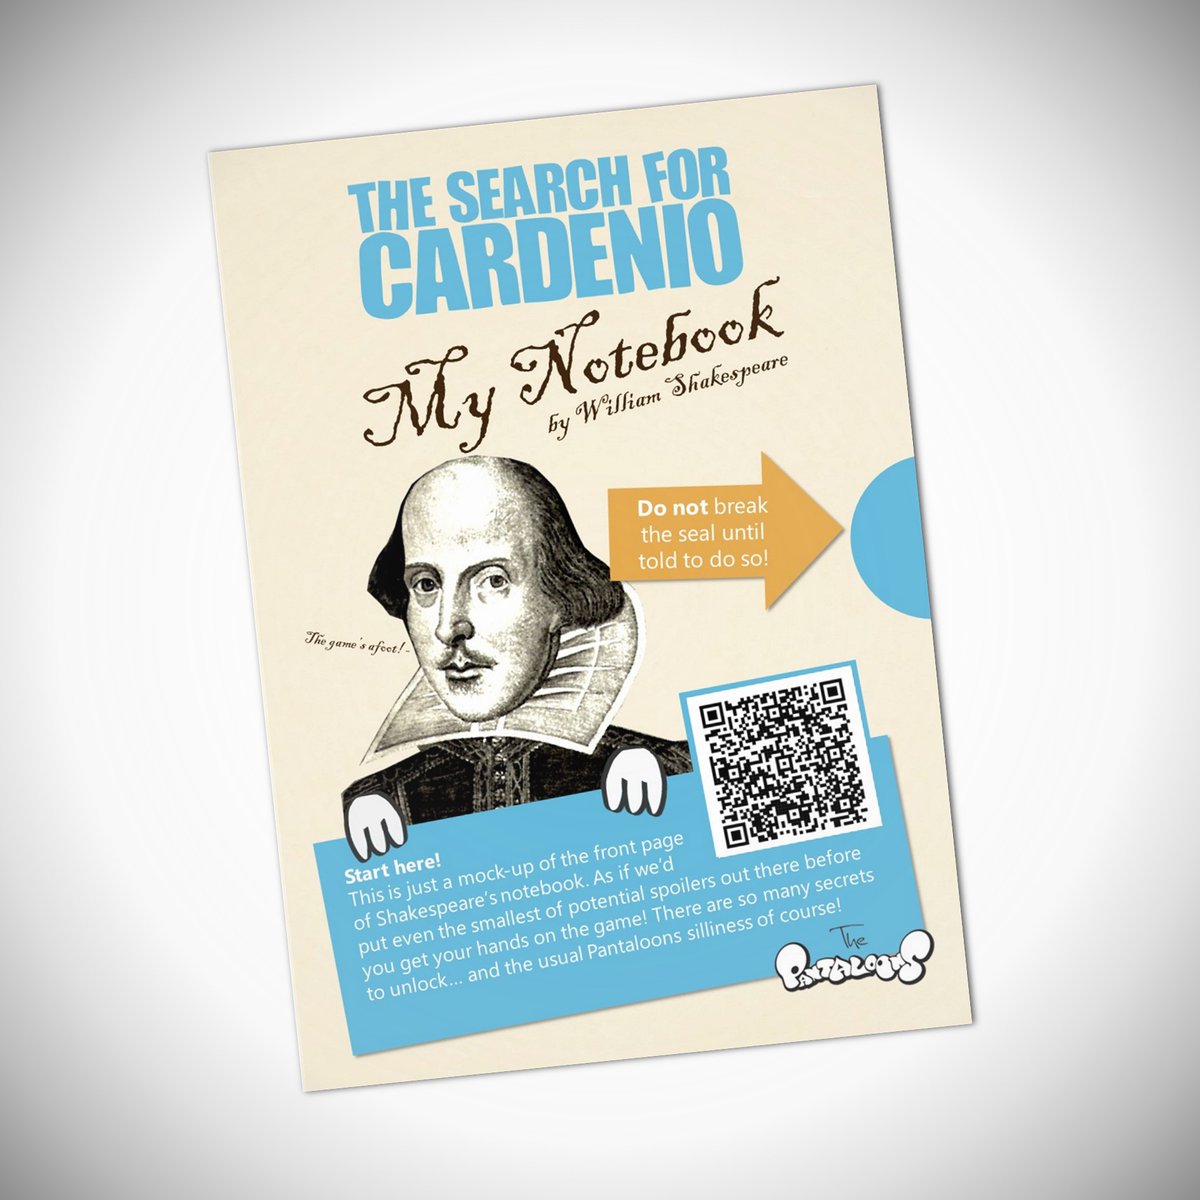 The game's afoot with The Search For Cardenio! Help Shakespeare’s ghost locate his lost play Cardenio by solving puzzles, overcoming challenges and unravelling mysteries in Shakespeare’s notebook – and online! thepantaloons.co.uk/product/the-se…